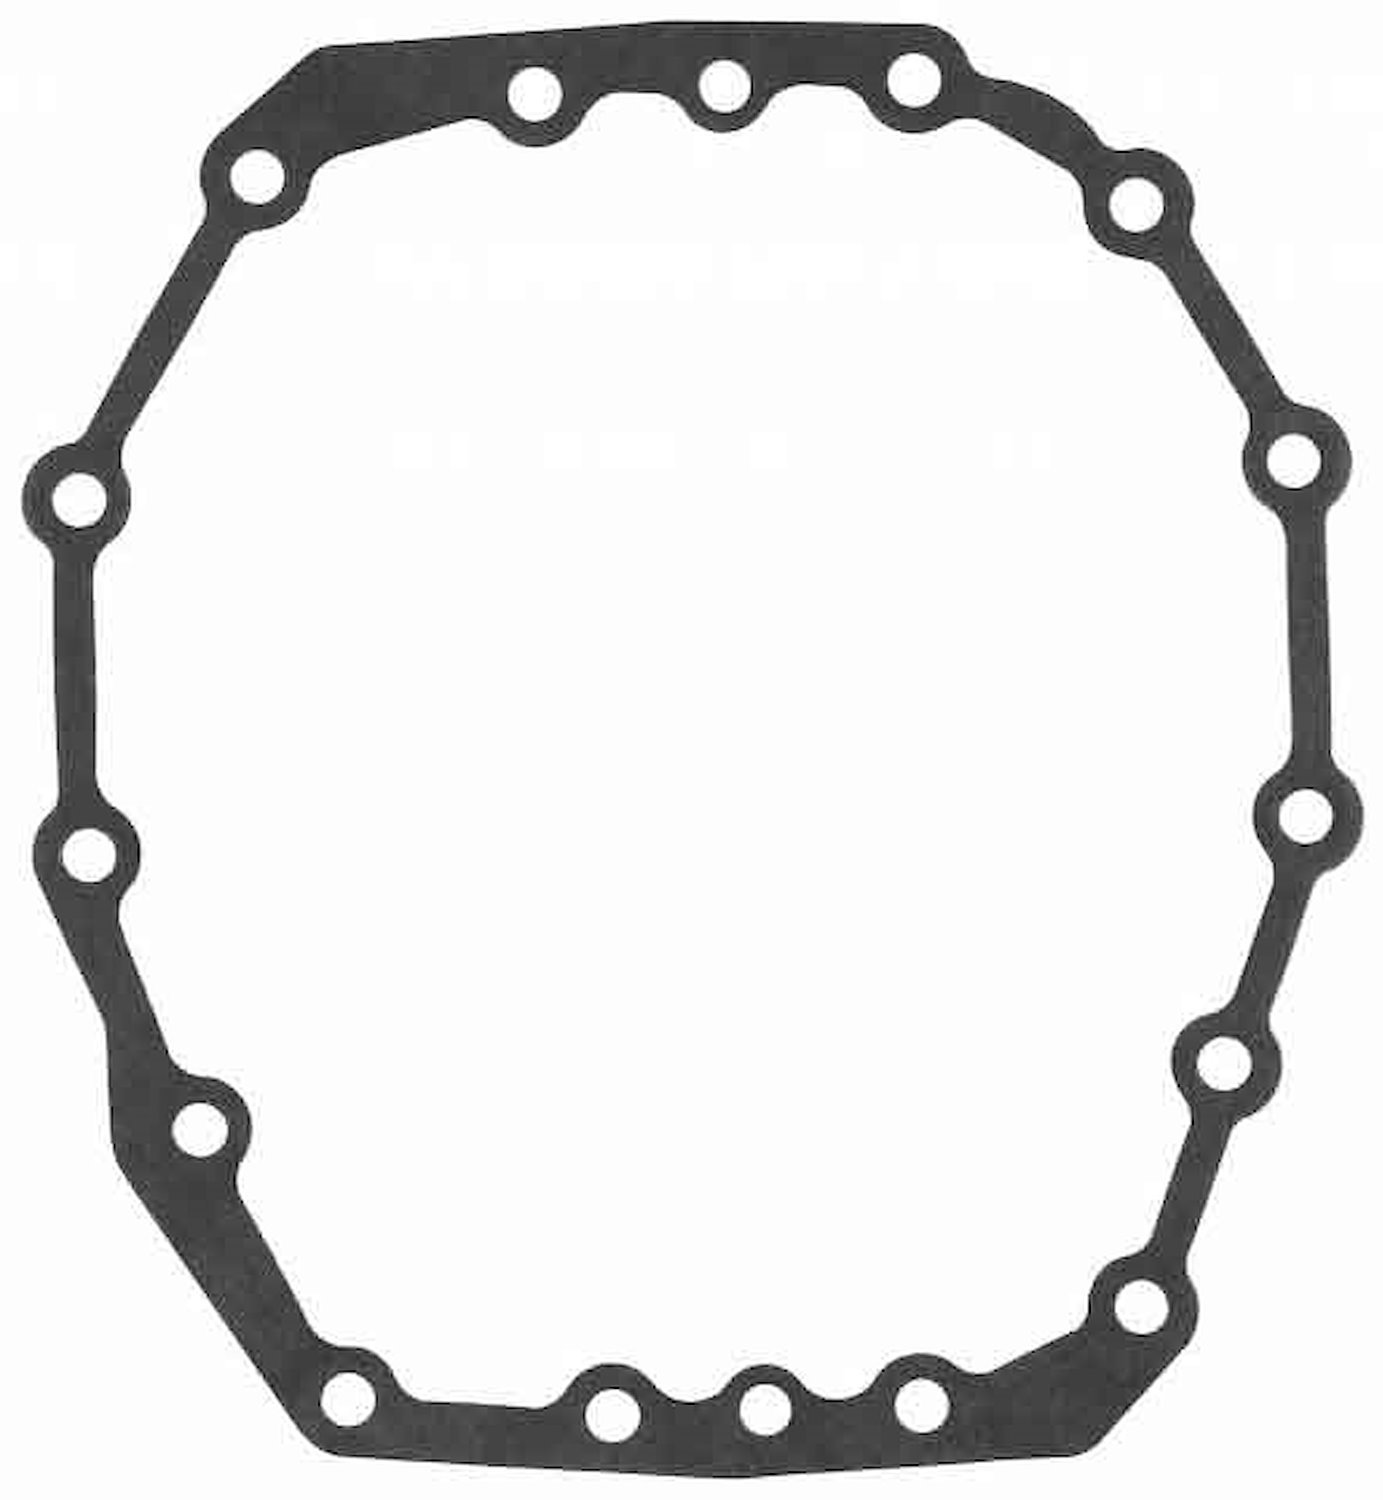 16-Bolt Differential Gasket For Nissan Titan XD 5.0L - 235 mm Axle